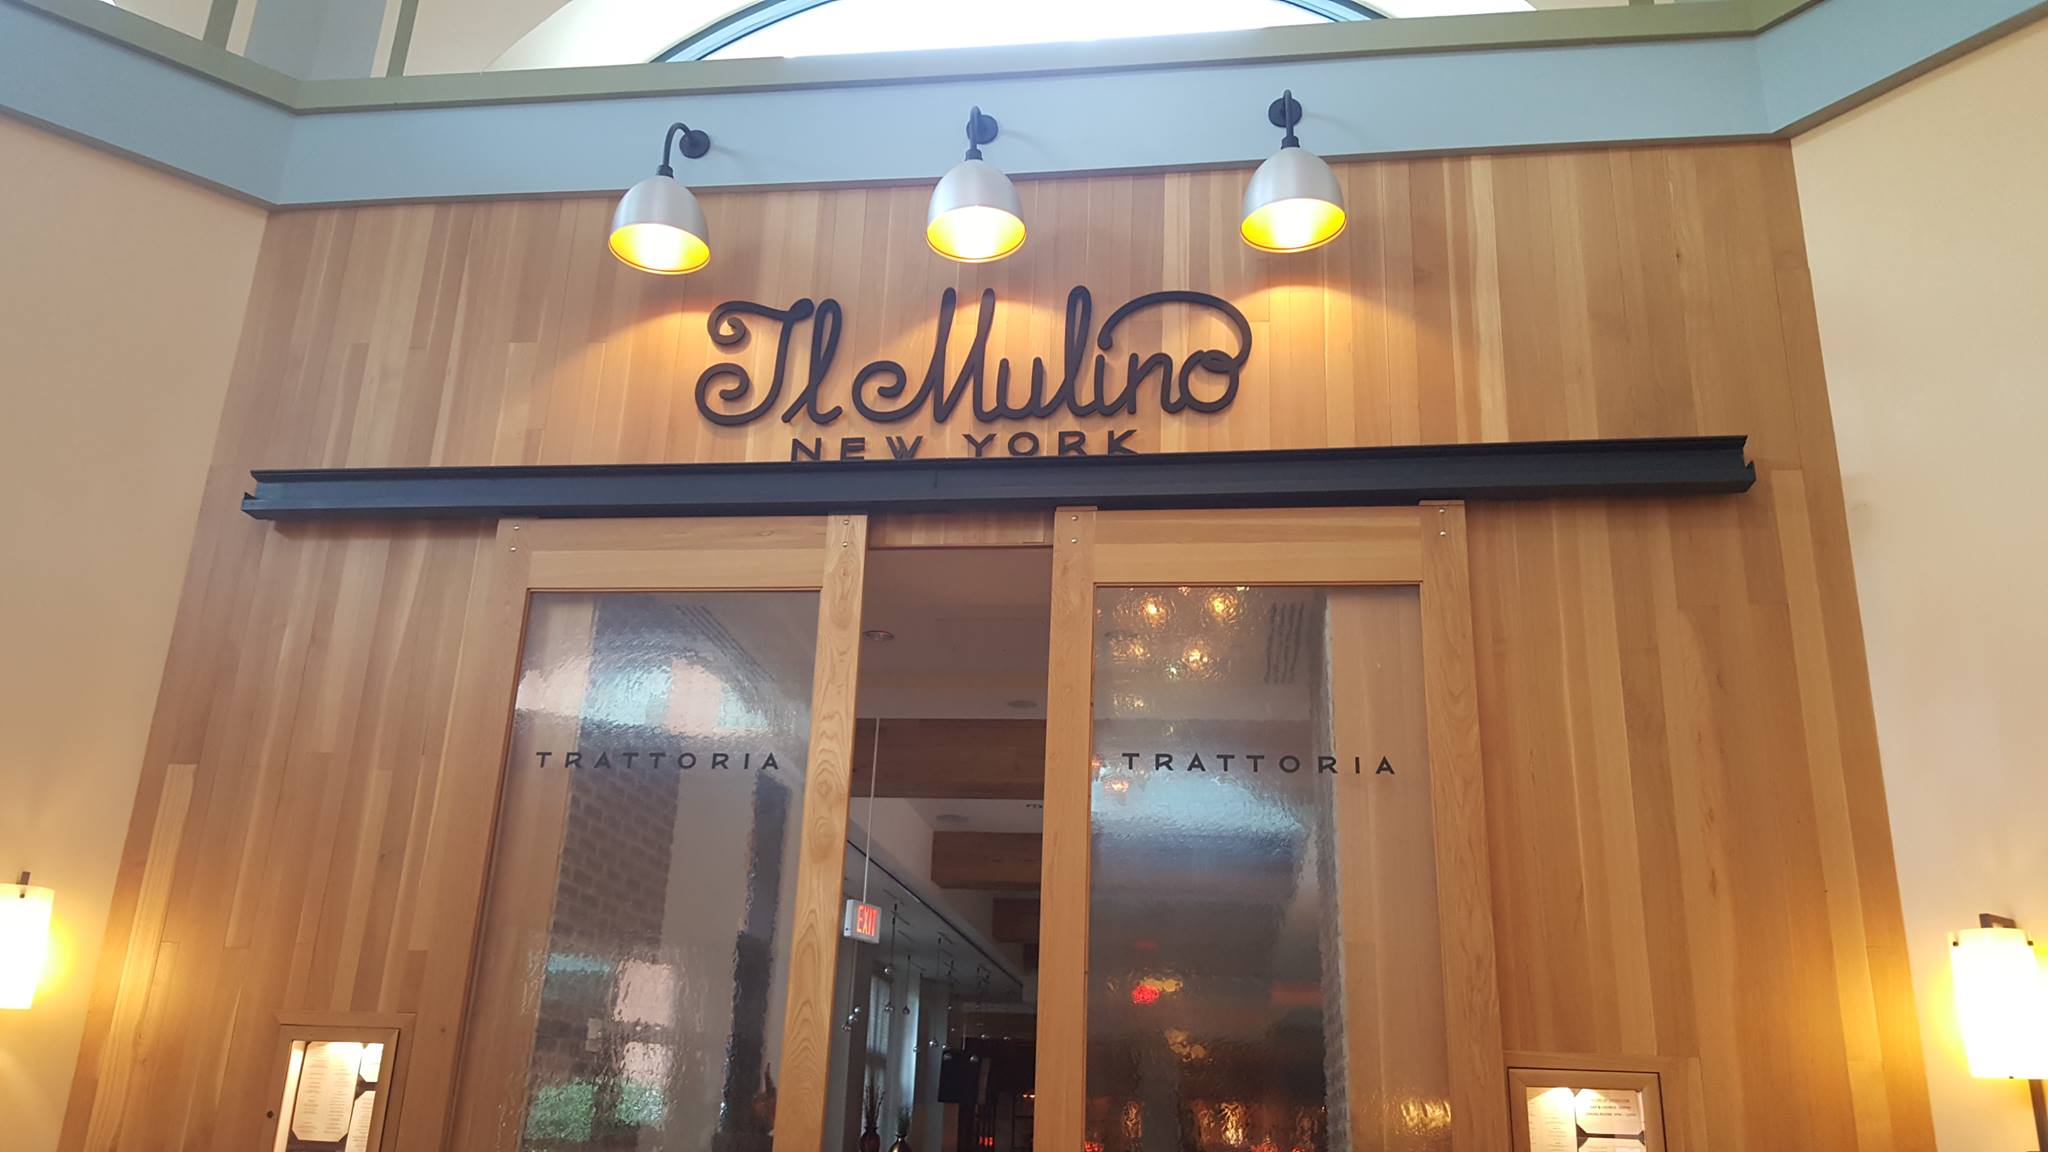 Il Mulino New York Trattoria and Bluezoo will Take Part in This Year’s Magical Dining Month